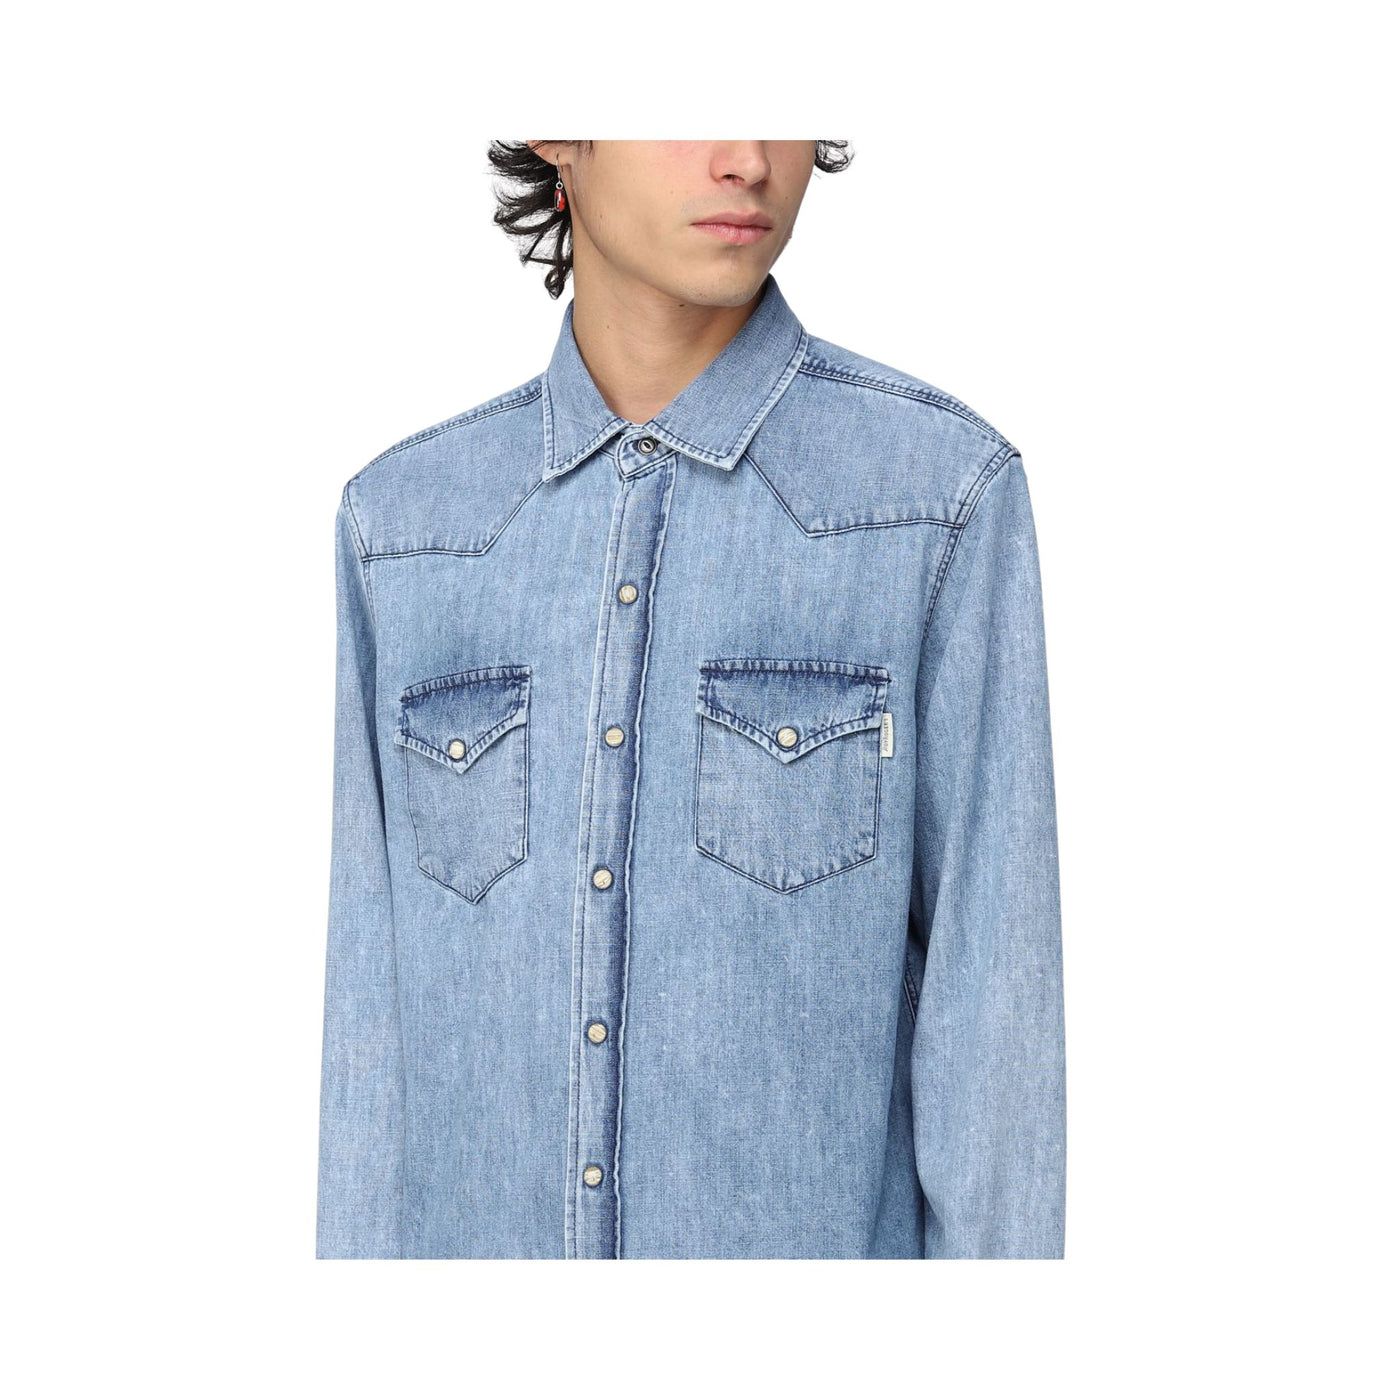 Men's jeans shirt with embroidery